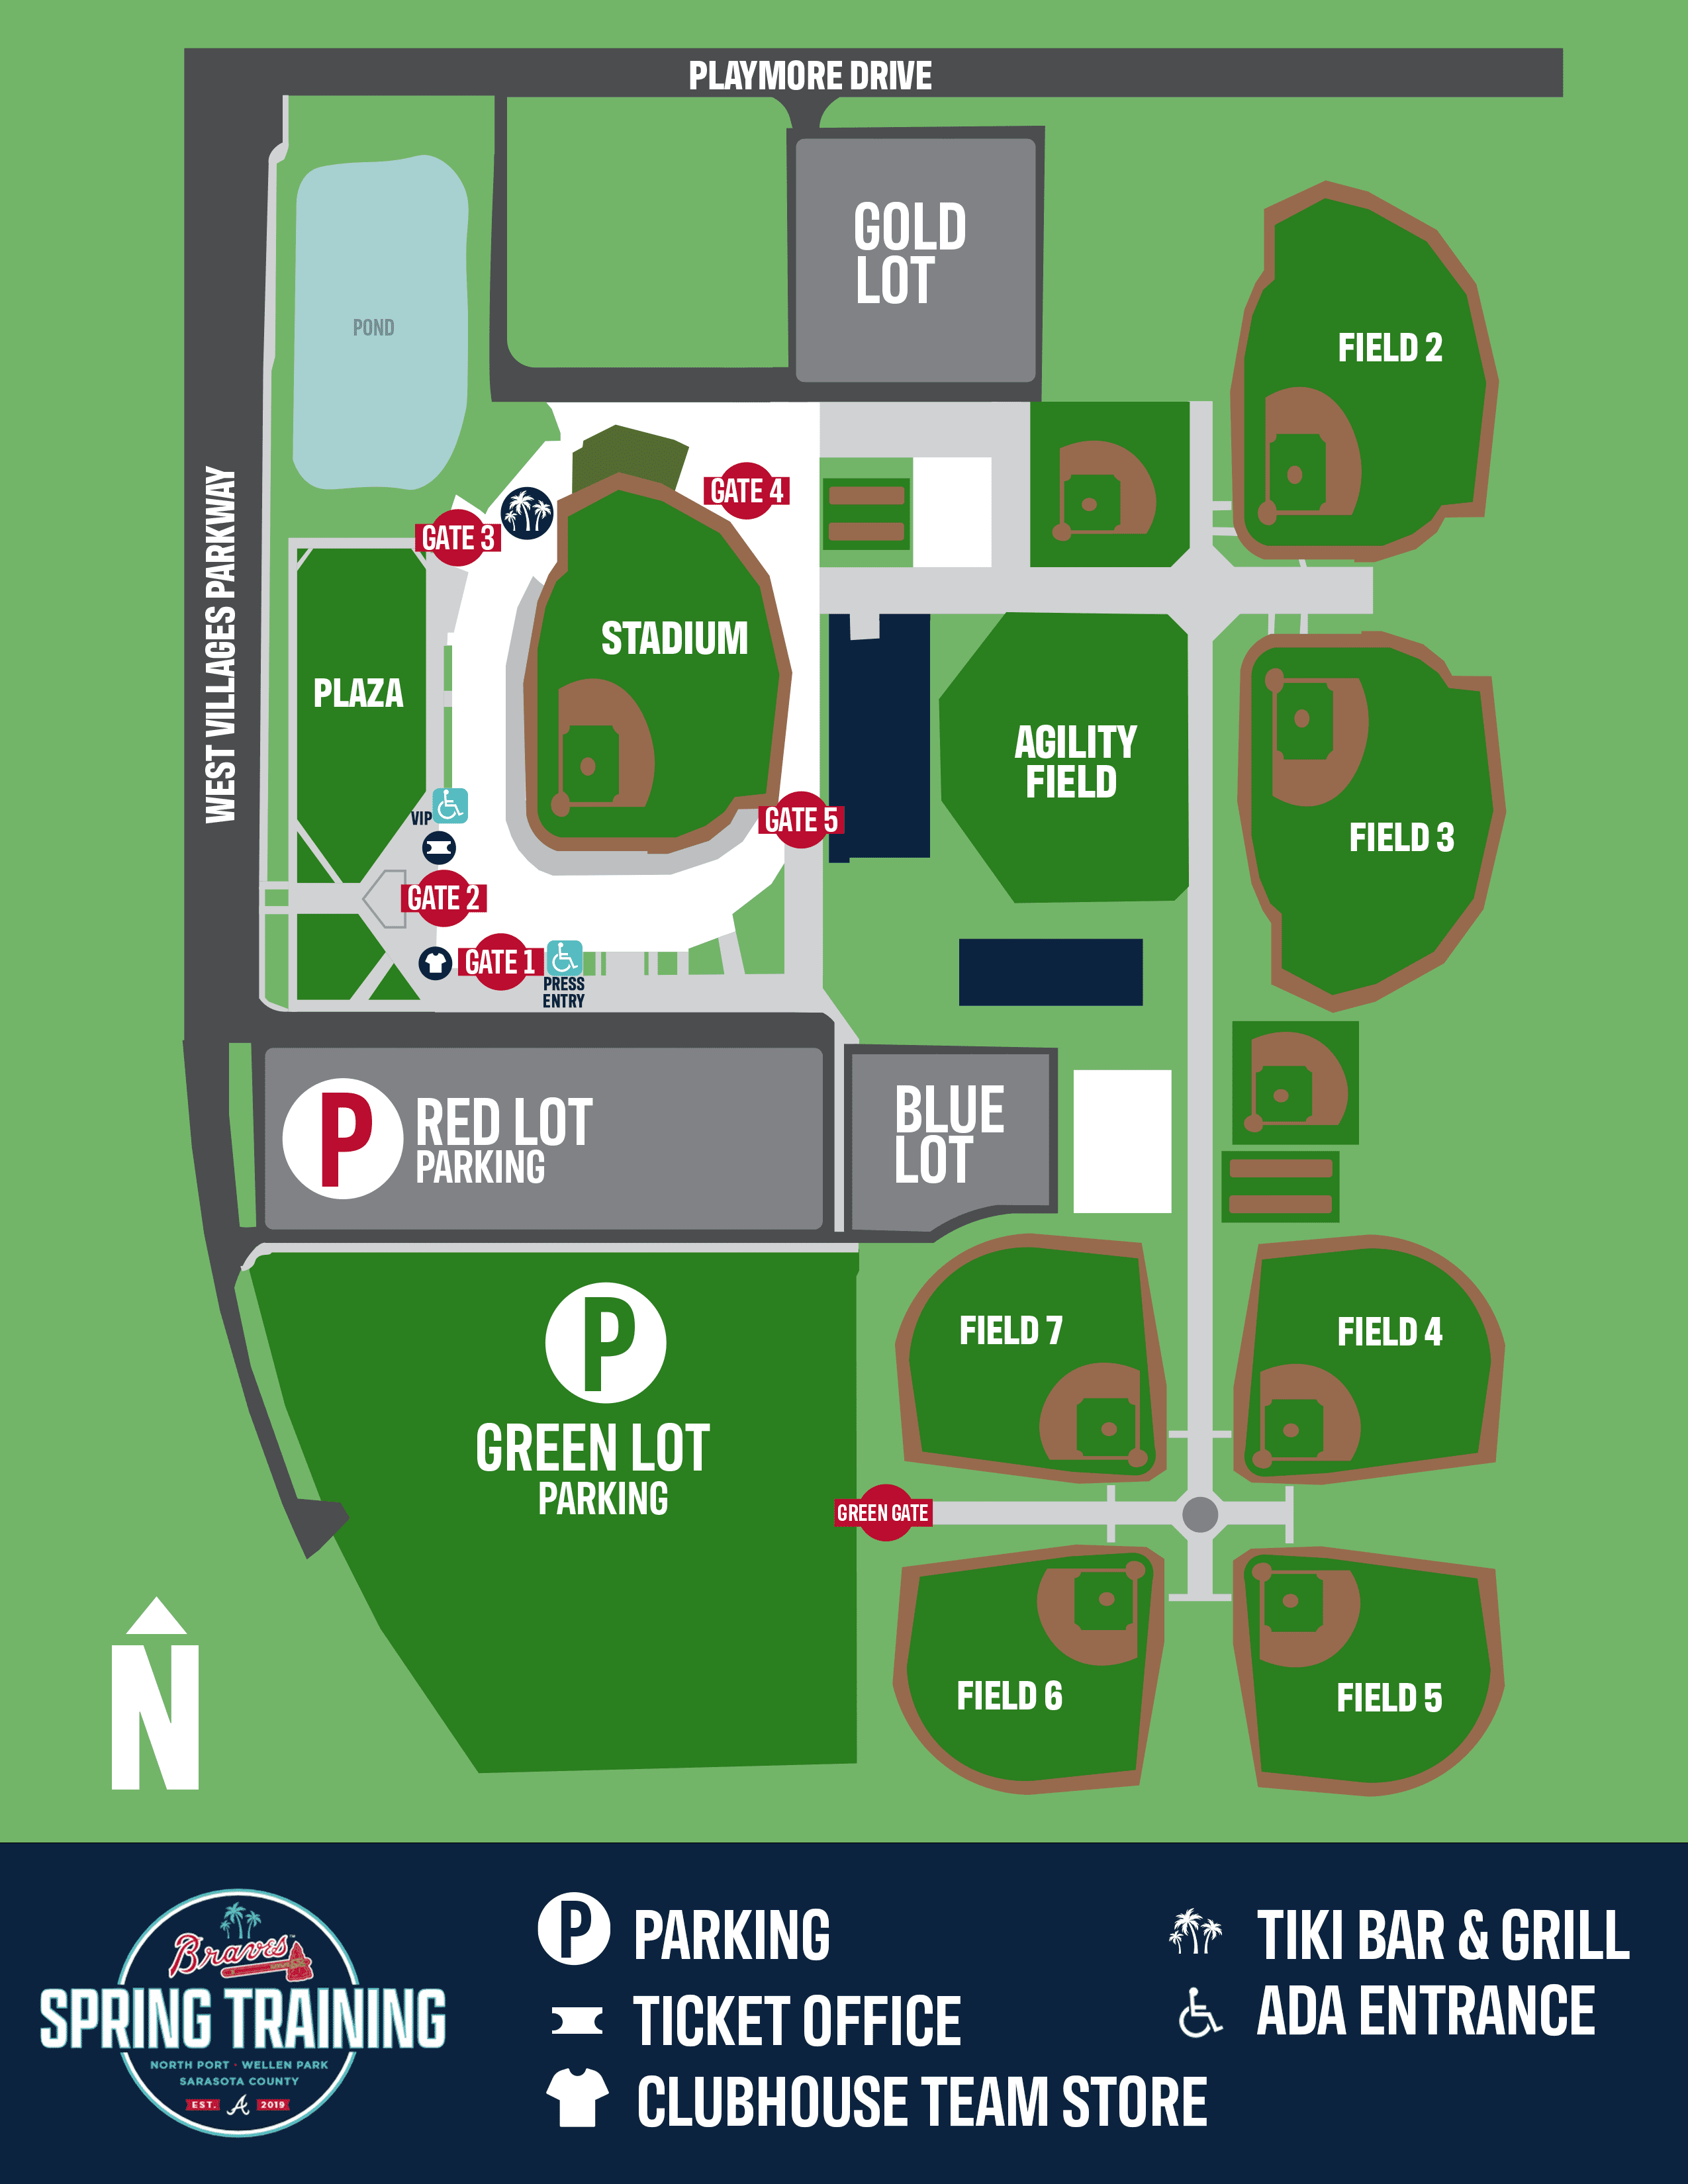 CoolToday Park - Visit the Braves Team Store at CoolToday